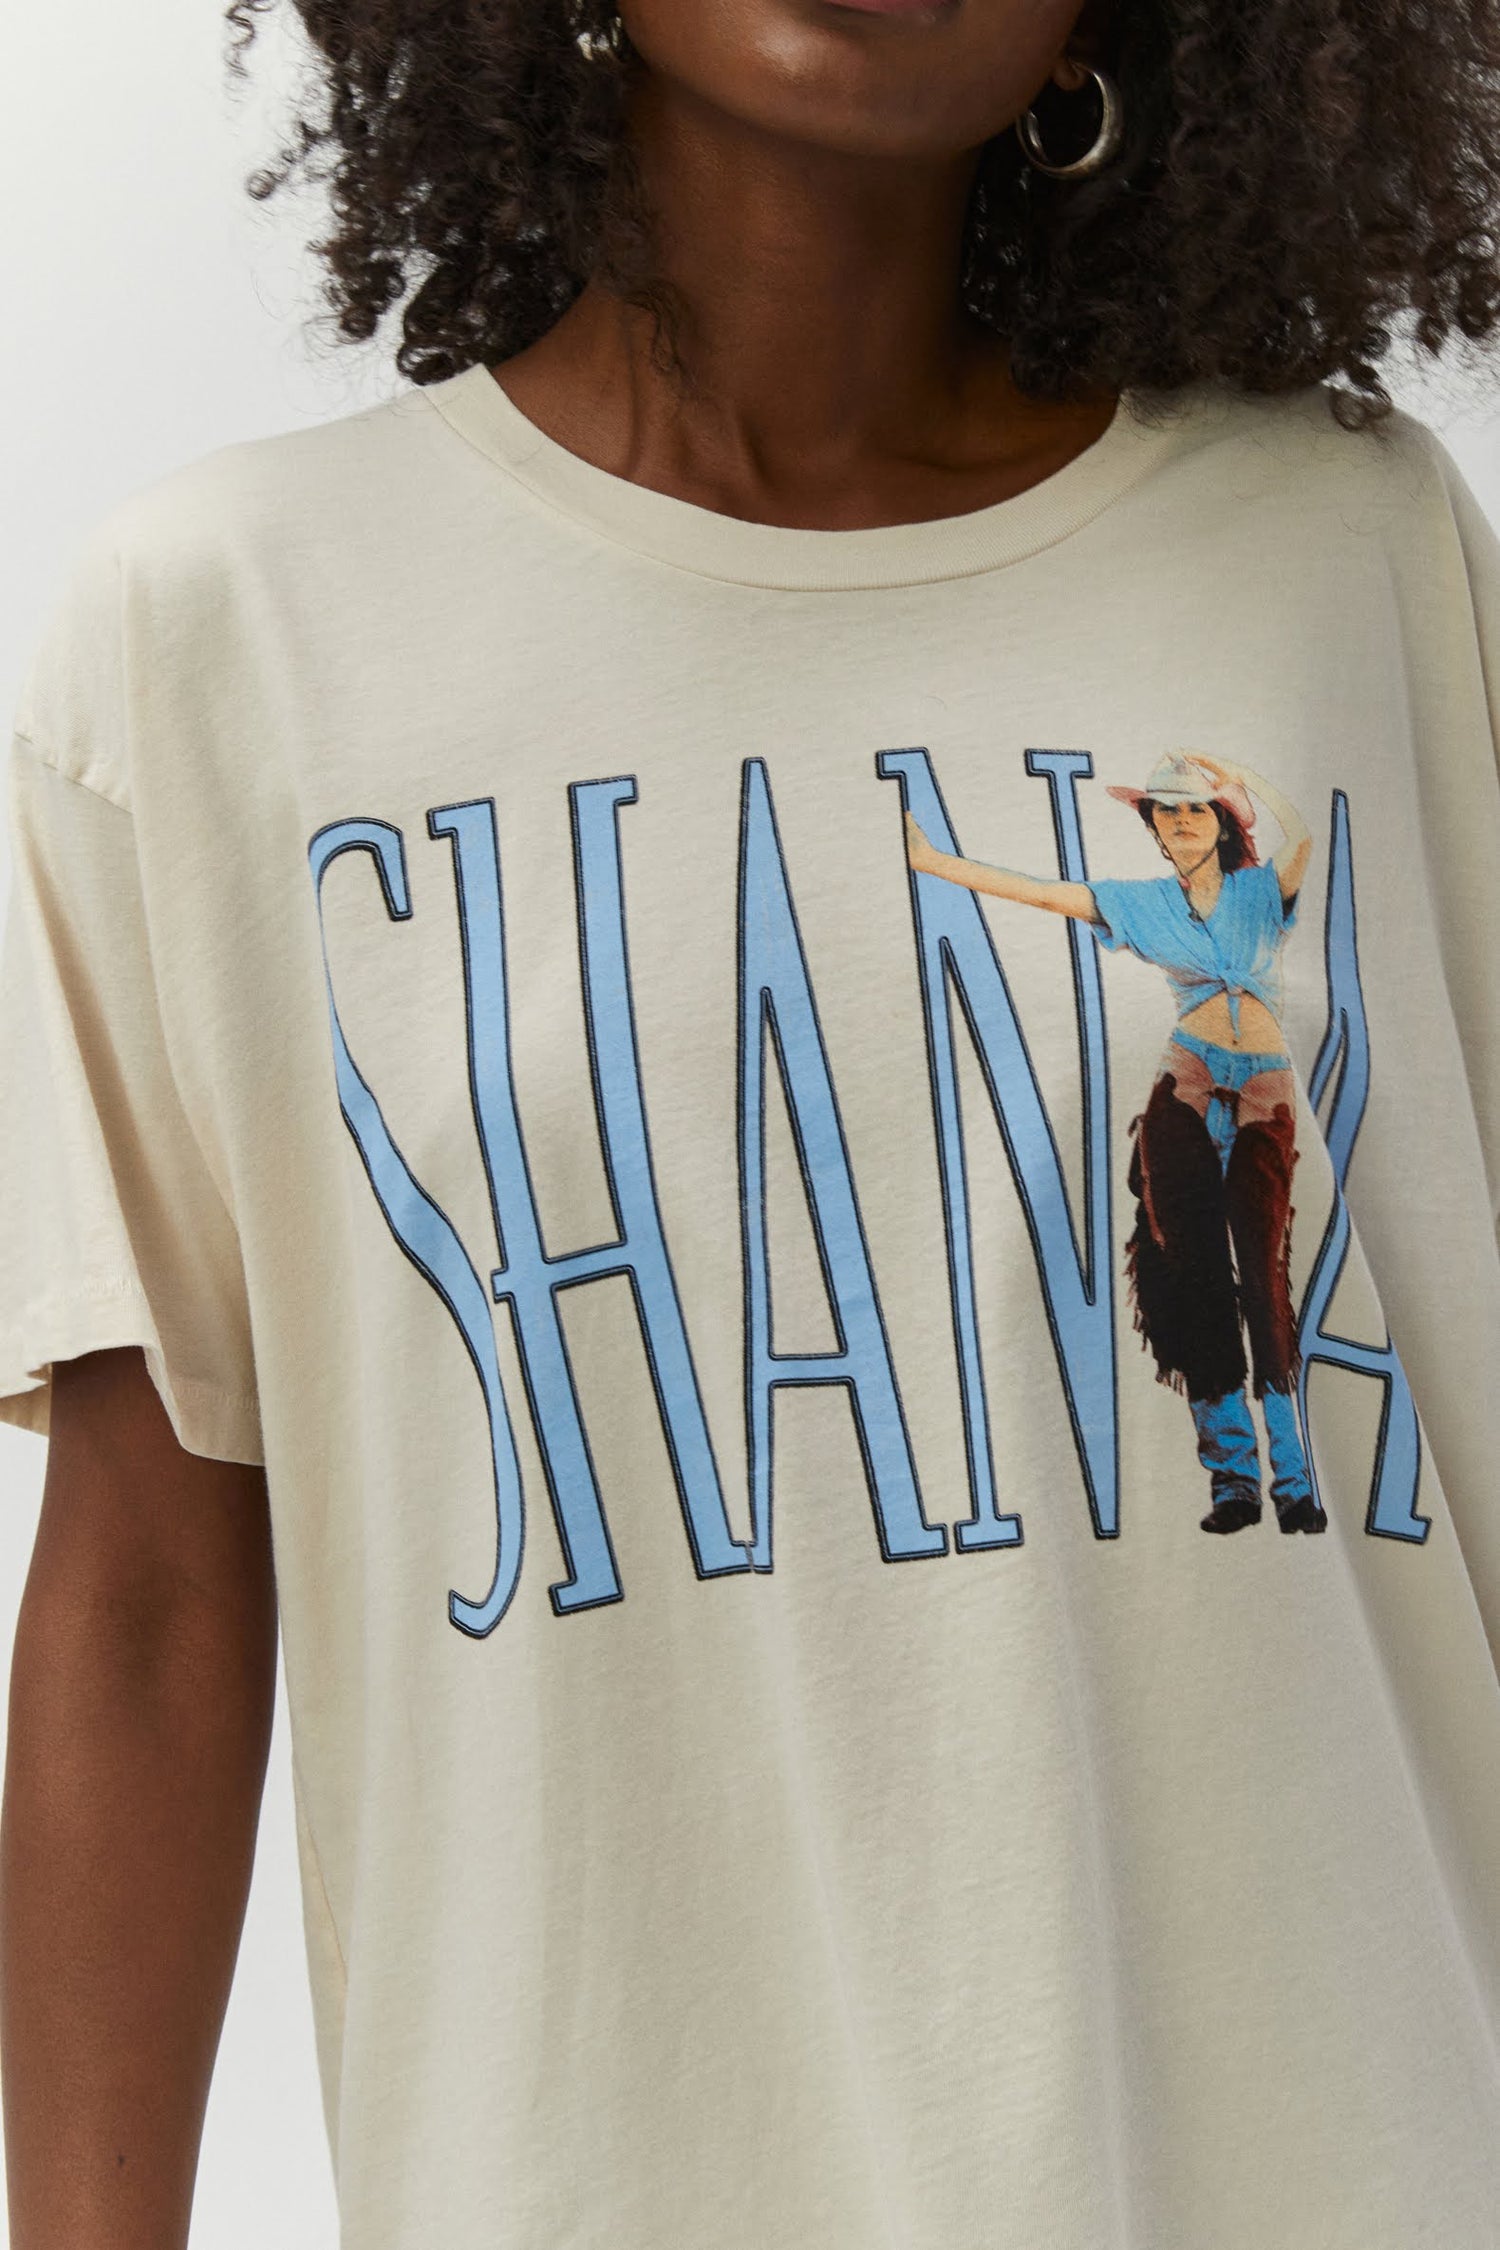 Shania Boots Been Under Merch Tee in Dirty White